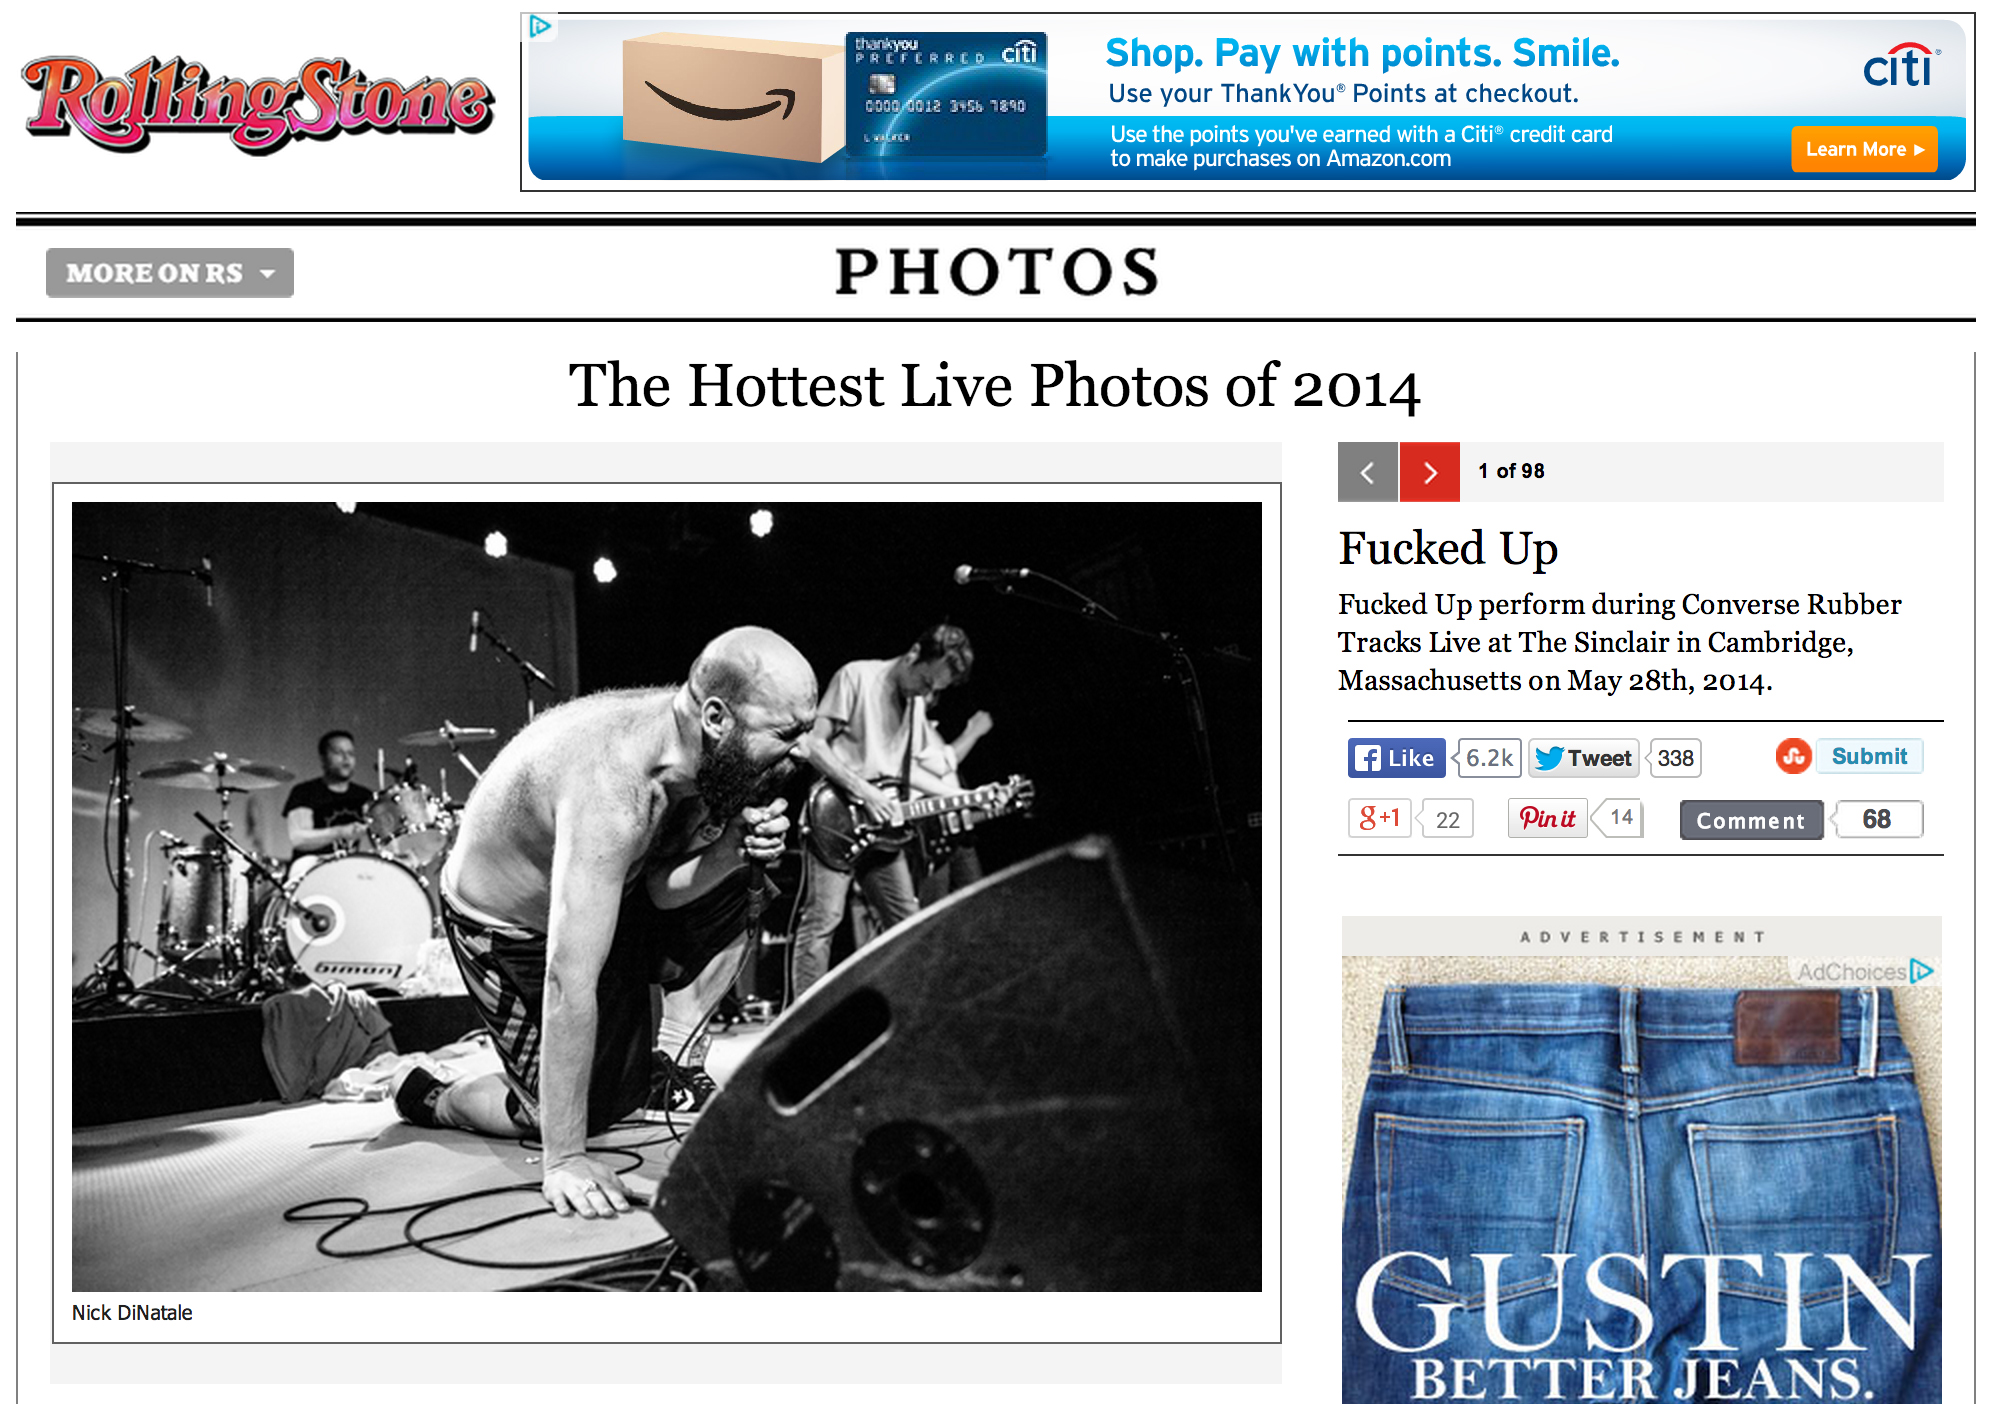  Rolling Stone - May 29th, 2014   The Hottest Live Photos of 2014   